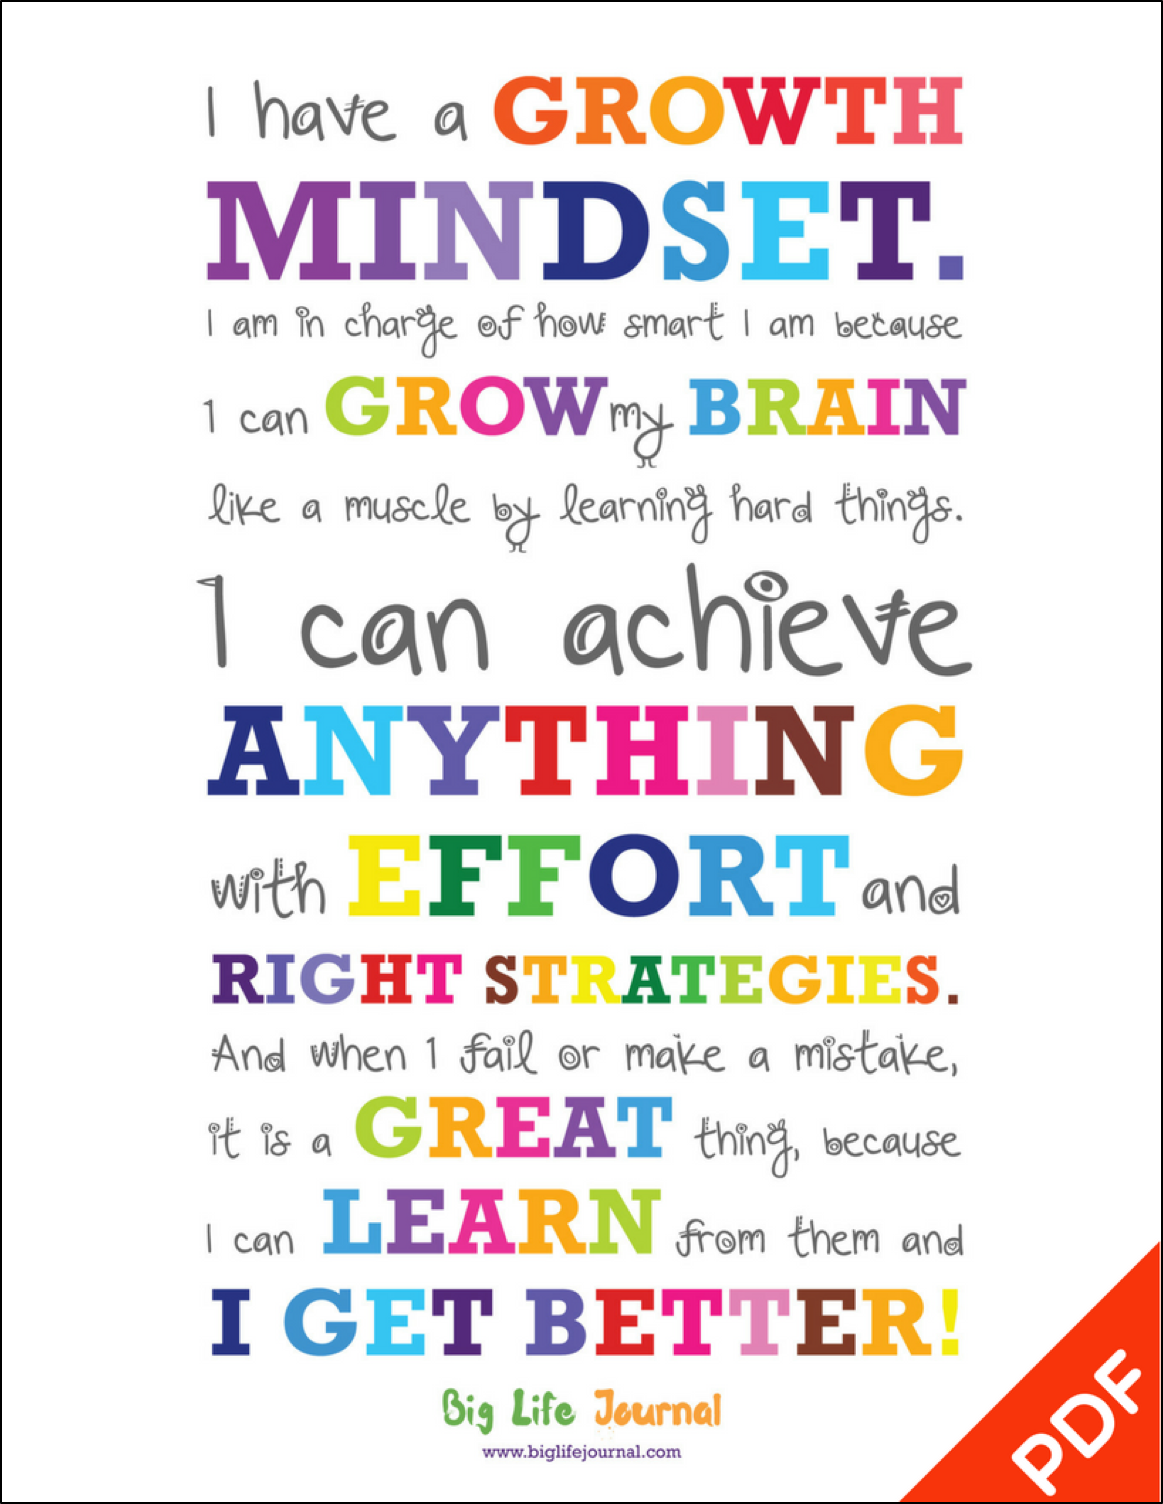 a-practical-way-to-teach-growth-mindset-to-kids-educating-matters